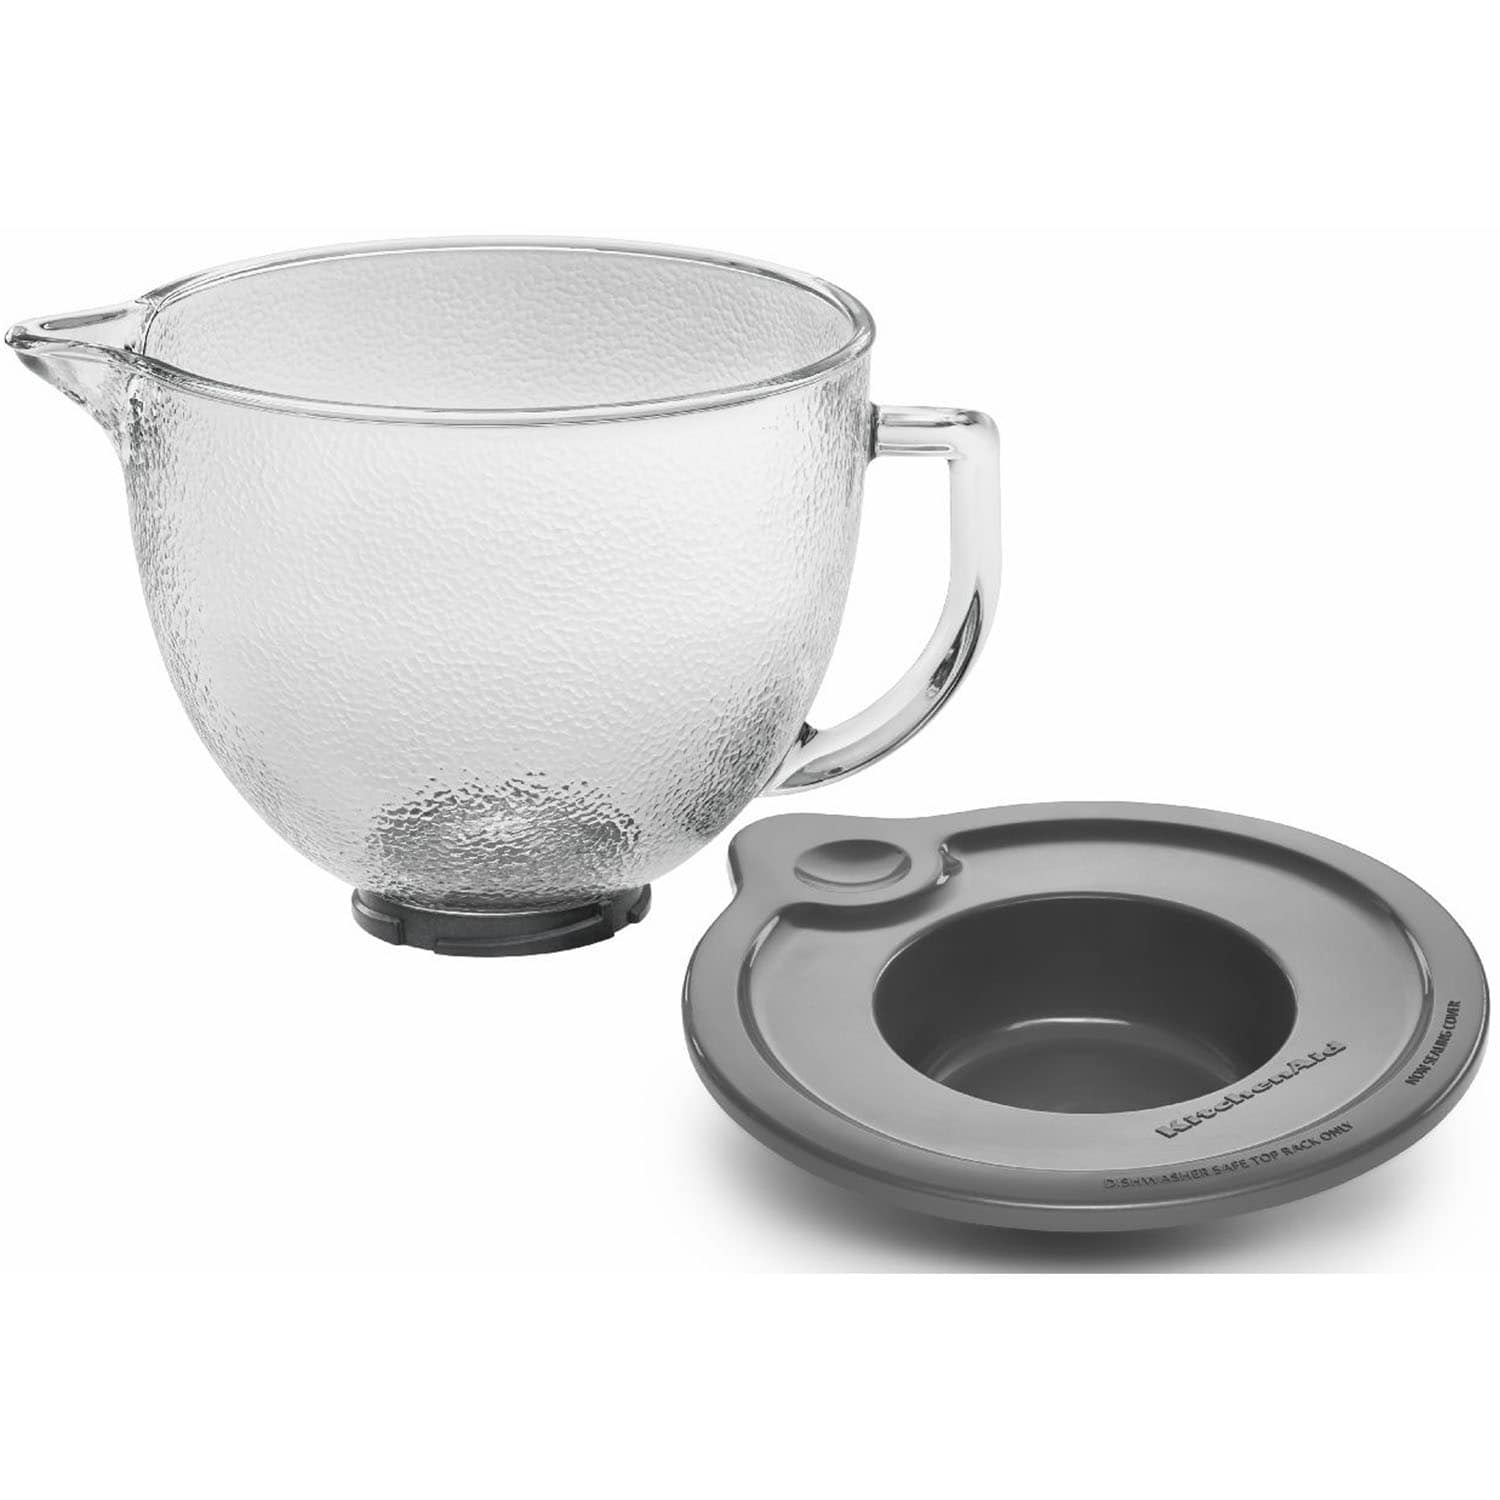 Replacement Mixing Bowl for Kitchenaid Tilt-head Mixer Hammered